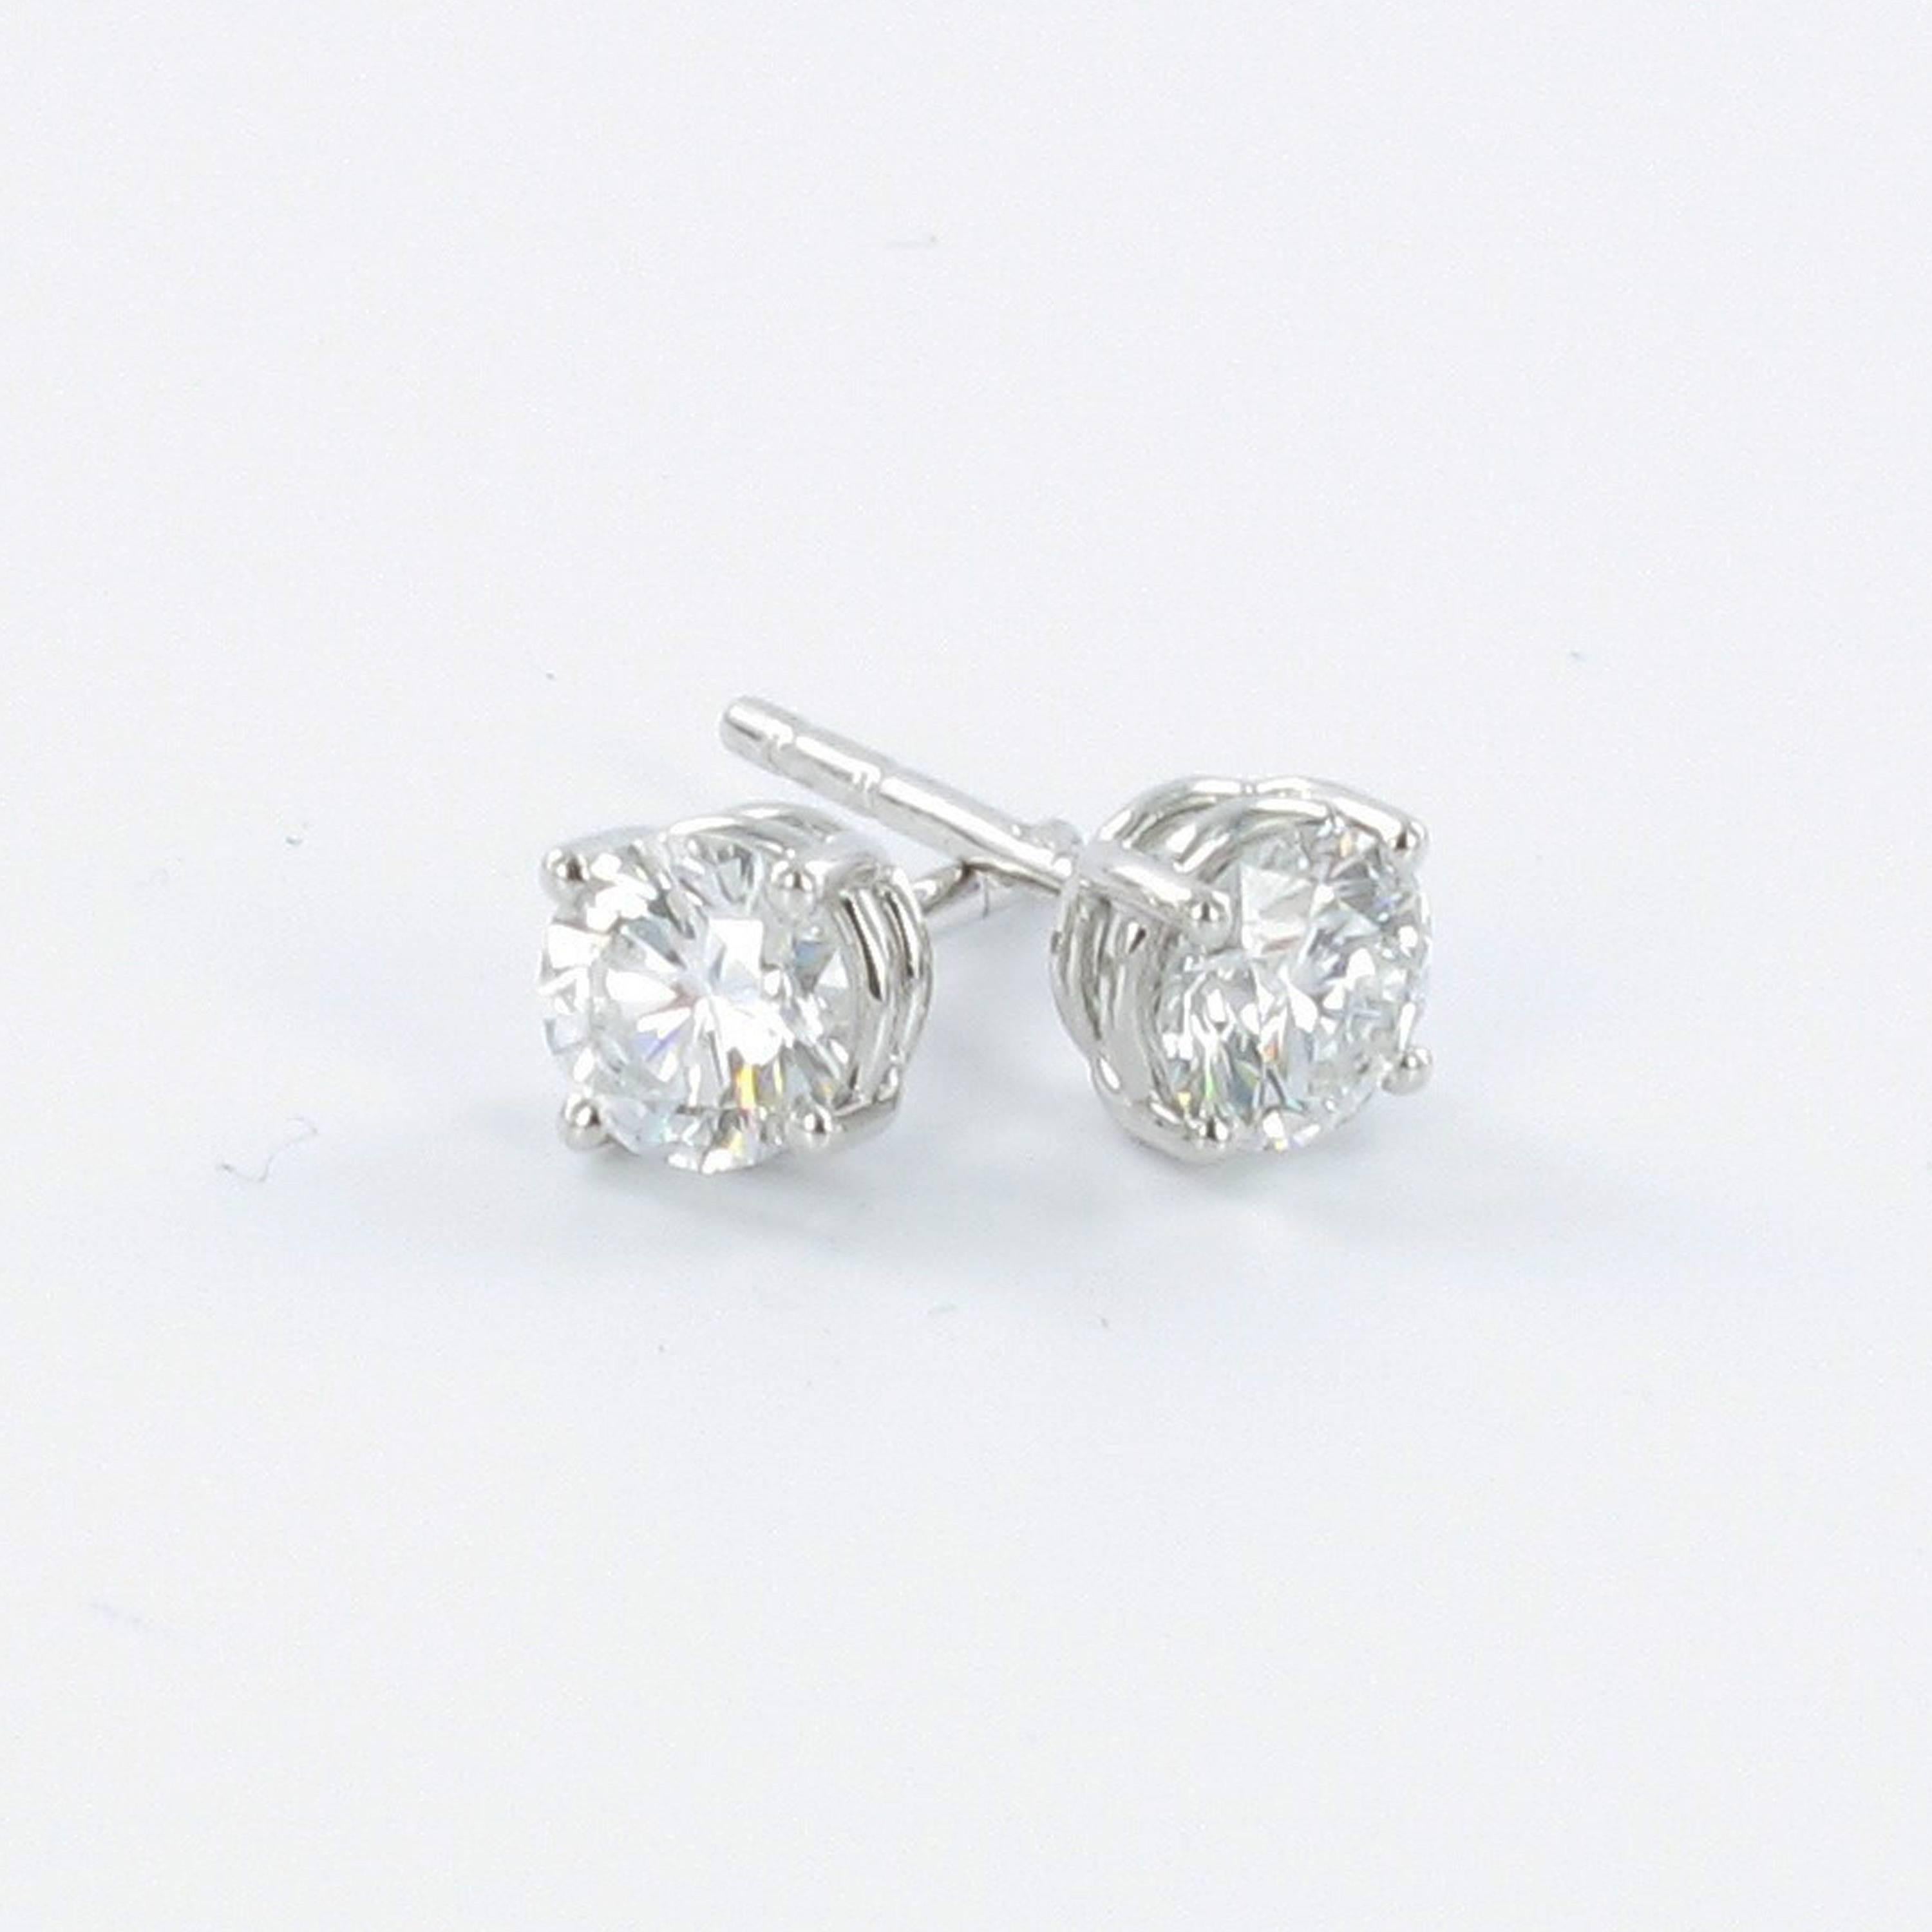 Classic solitaire stud earrings featuring two perfectly matched brilliant cut diamonds of 0.52 and 0.52 carats and of H colour and vs1 clarity. Both diamonds accompagnied by GIA Diamond Dossier. Handmade Gübelin four-prong setting in 18 karat white